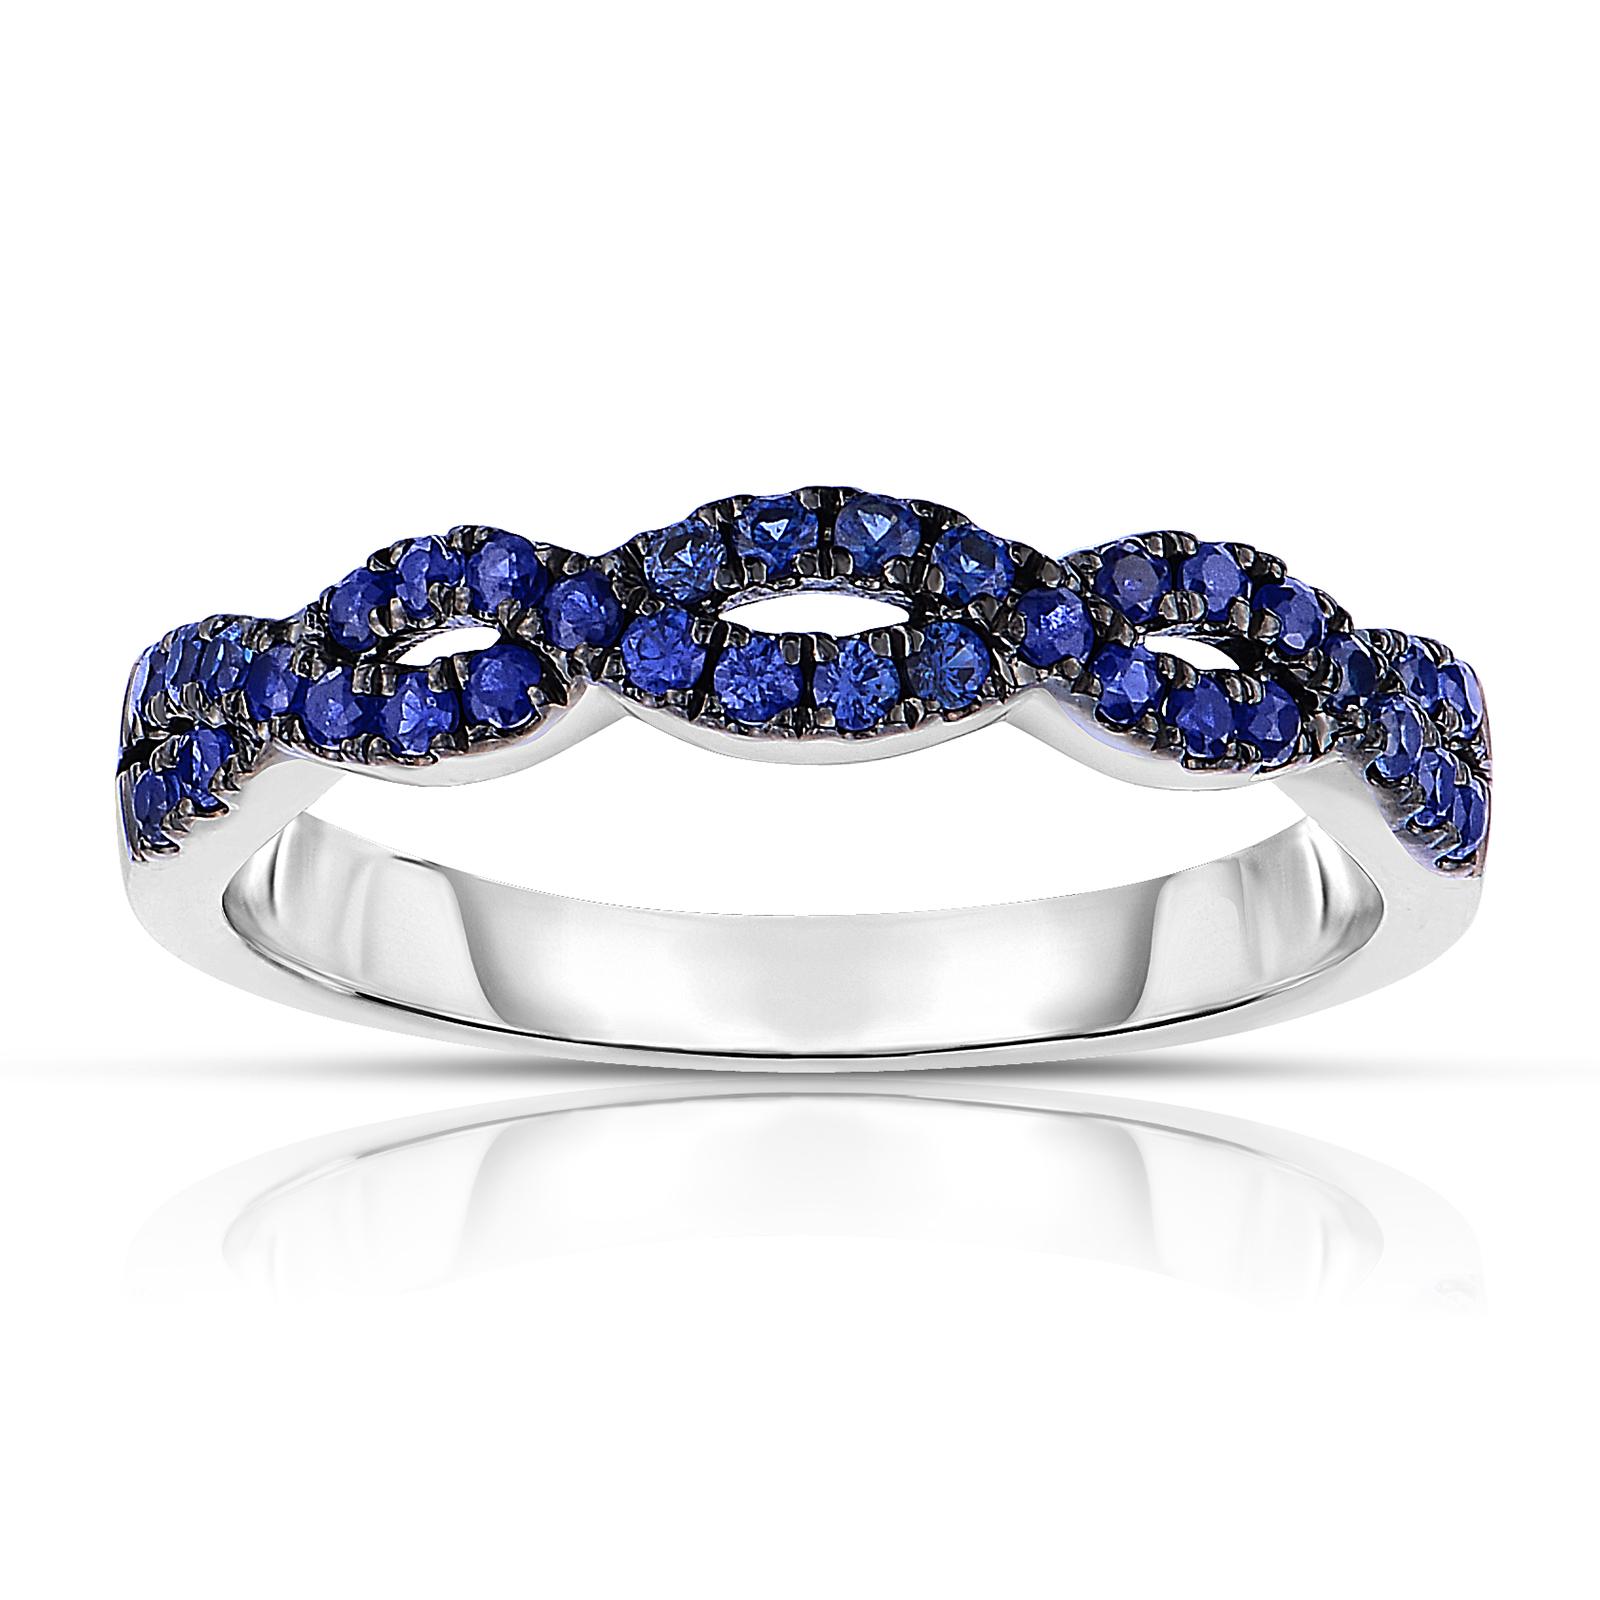 Wrapped In Radiance 10KW Sapphire Twist Ring